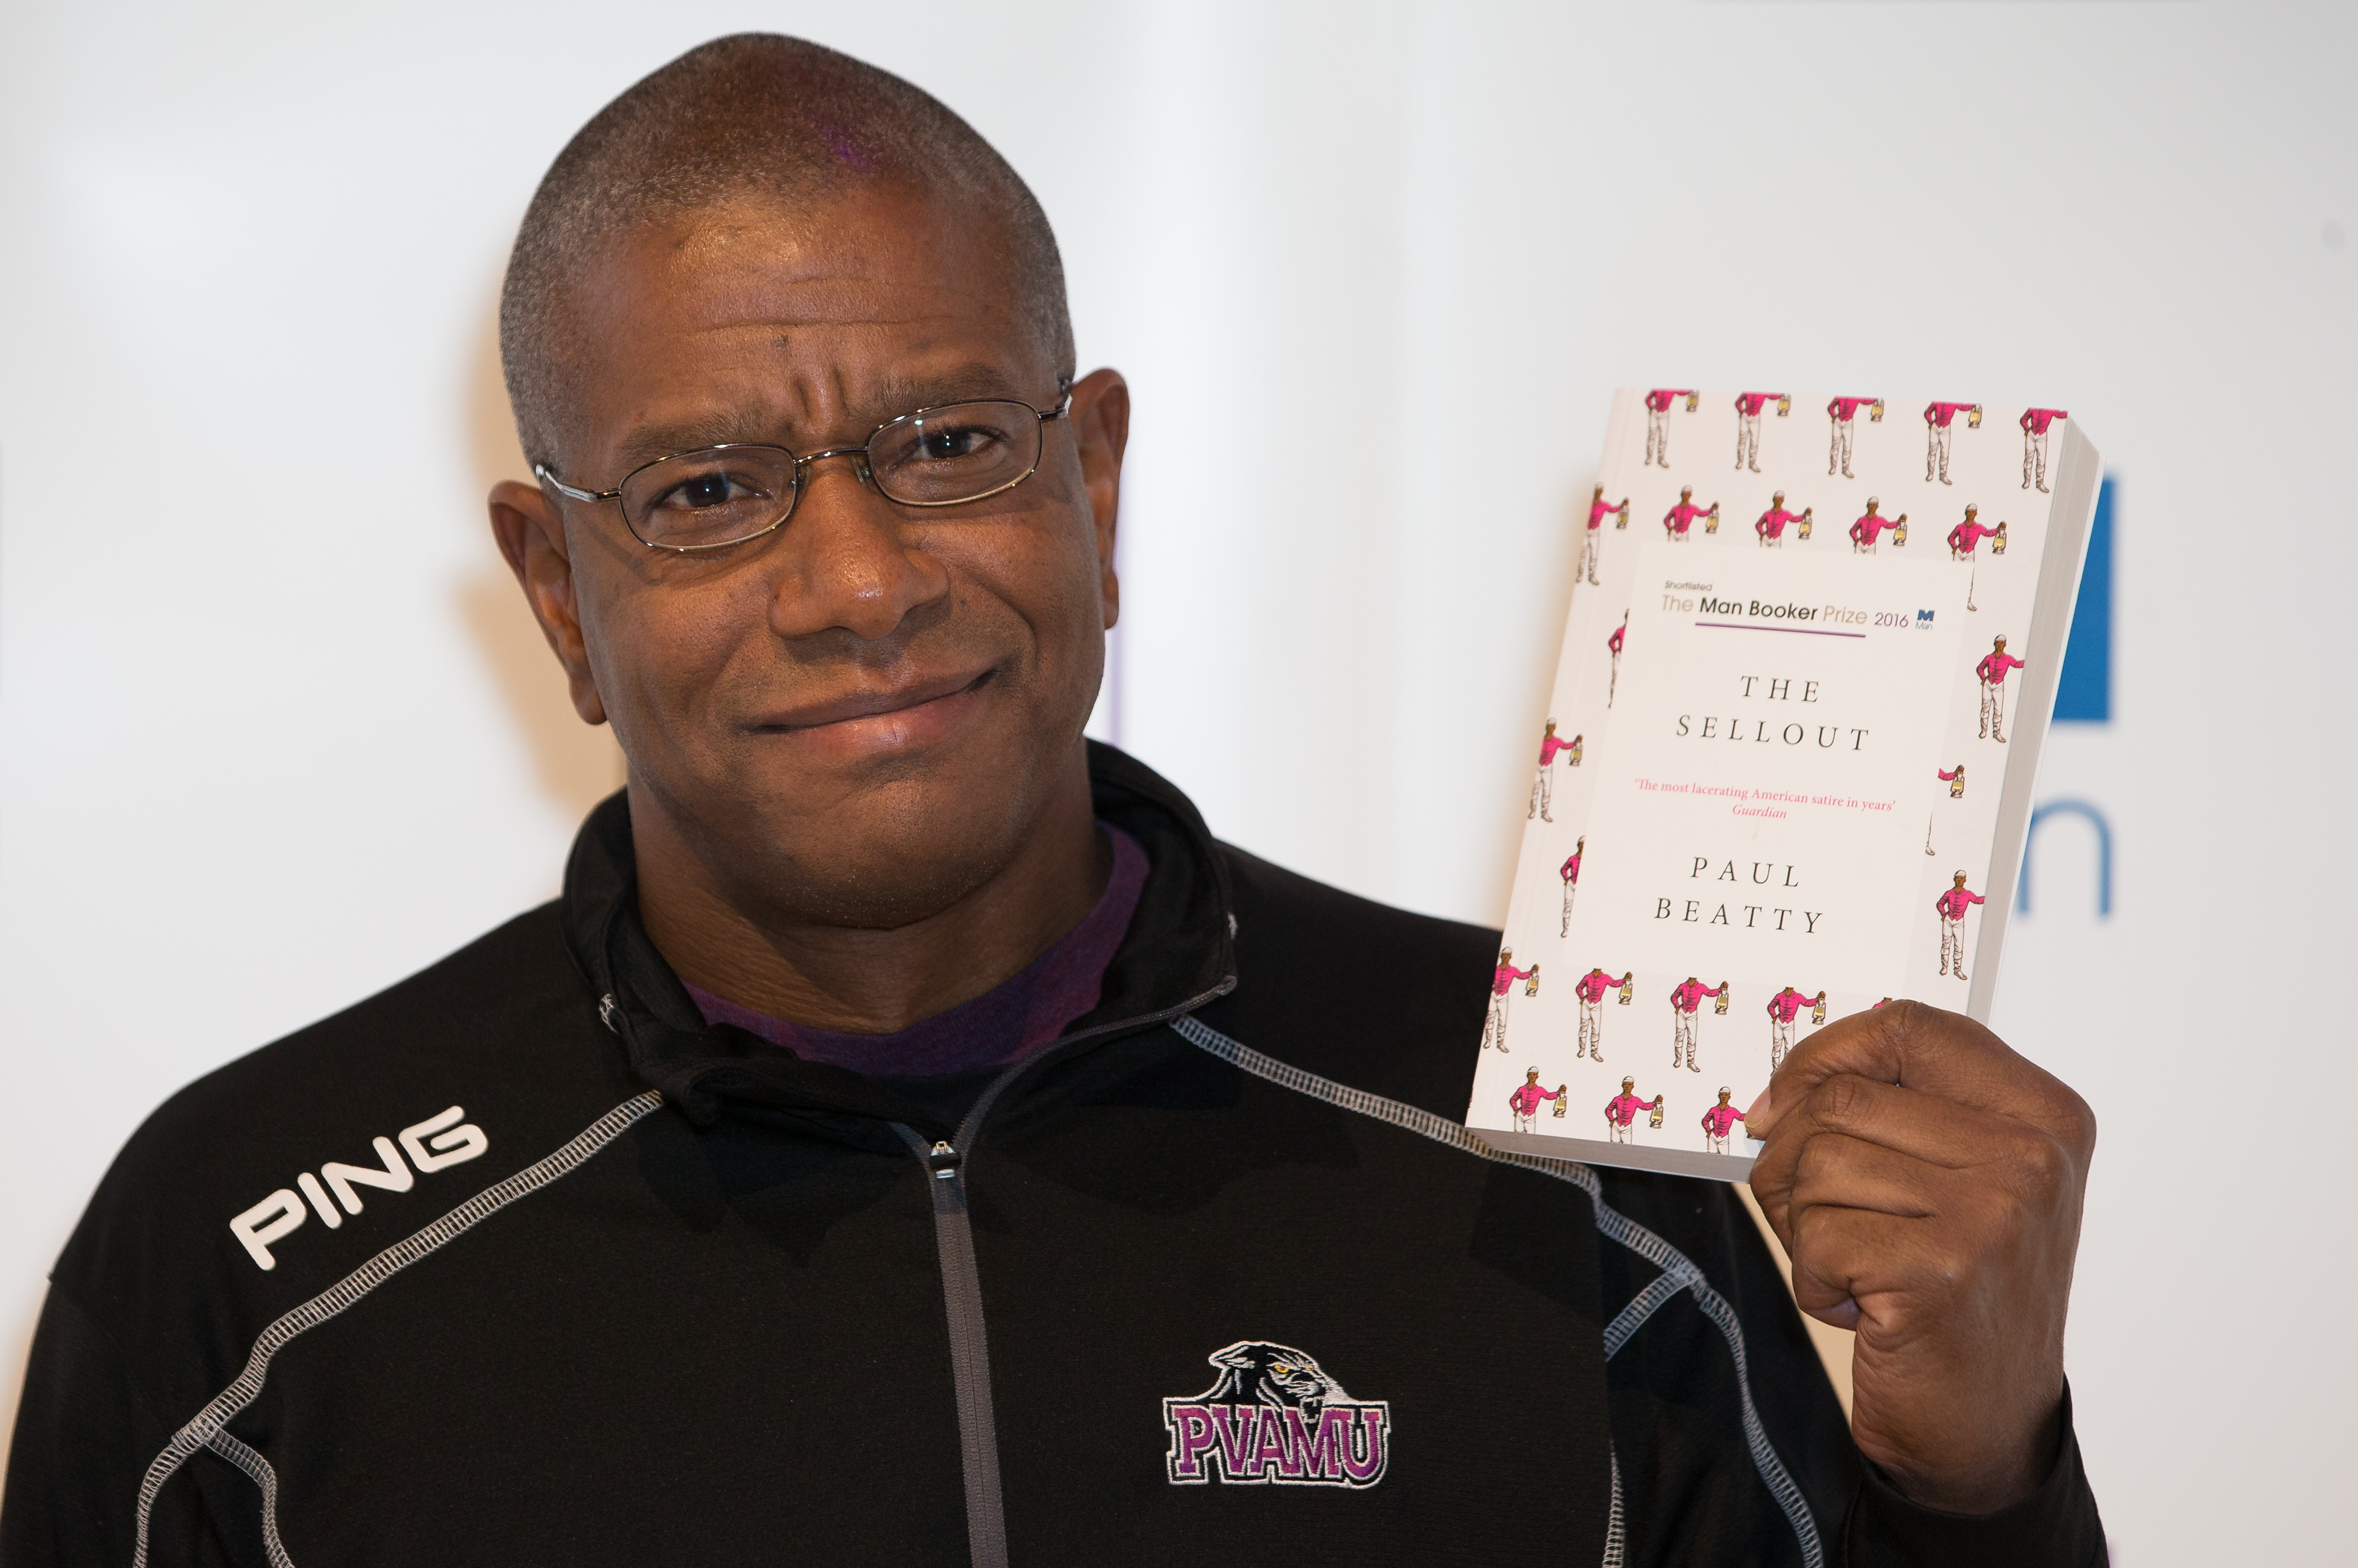 (FILES) This file photo taken on October 24, 2016 shows US author Paul Beatty posing for a photograph at a photocall in London on October 24, 2016. US author Paul Beatty became the first US author to win the Man Booker Prize for Fiction when he won the award on Tuesday October 25, 2016. / AFP PHOTO / DANIEL LEAL-OLIVAS